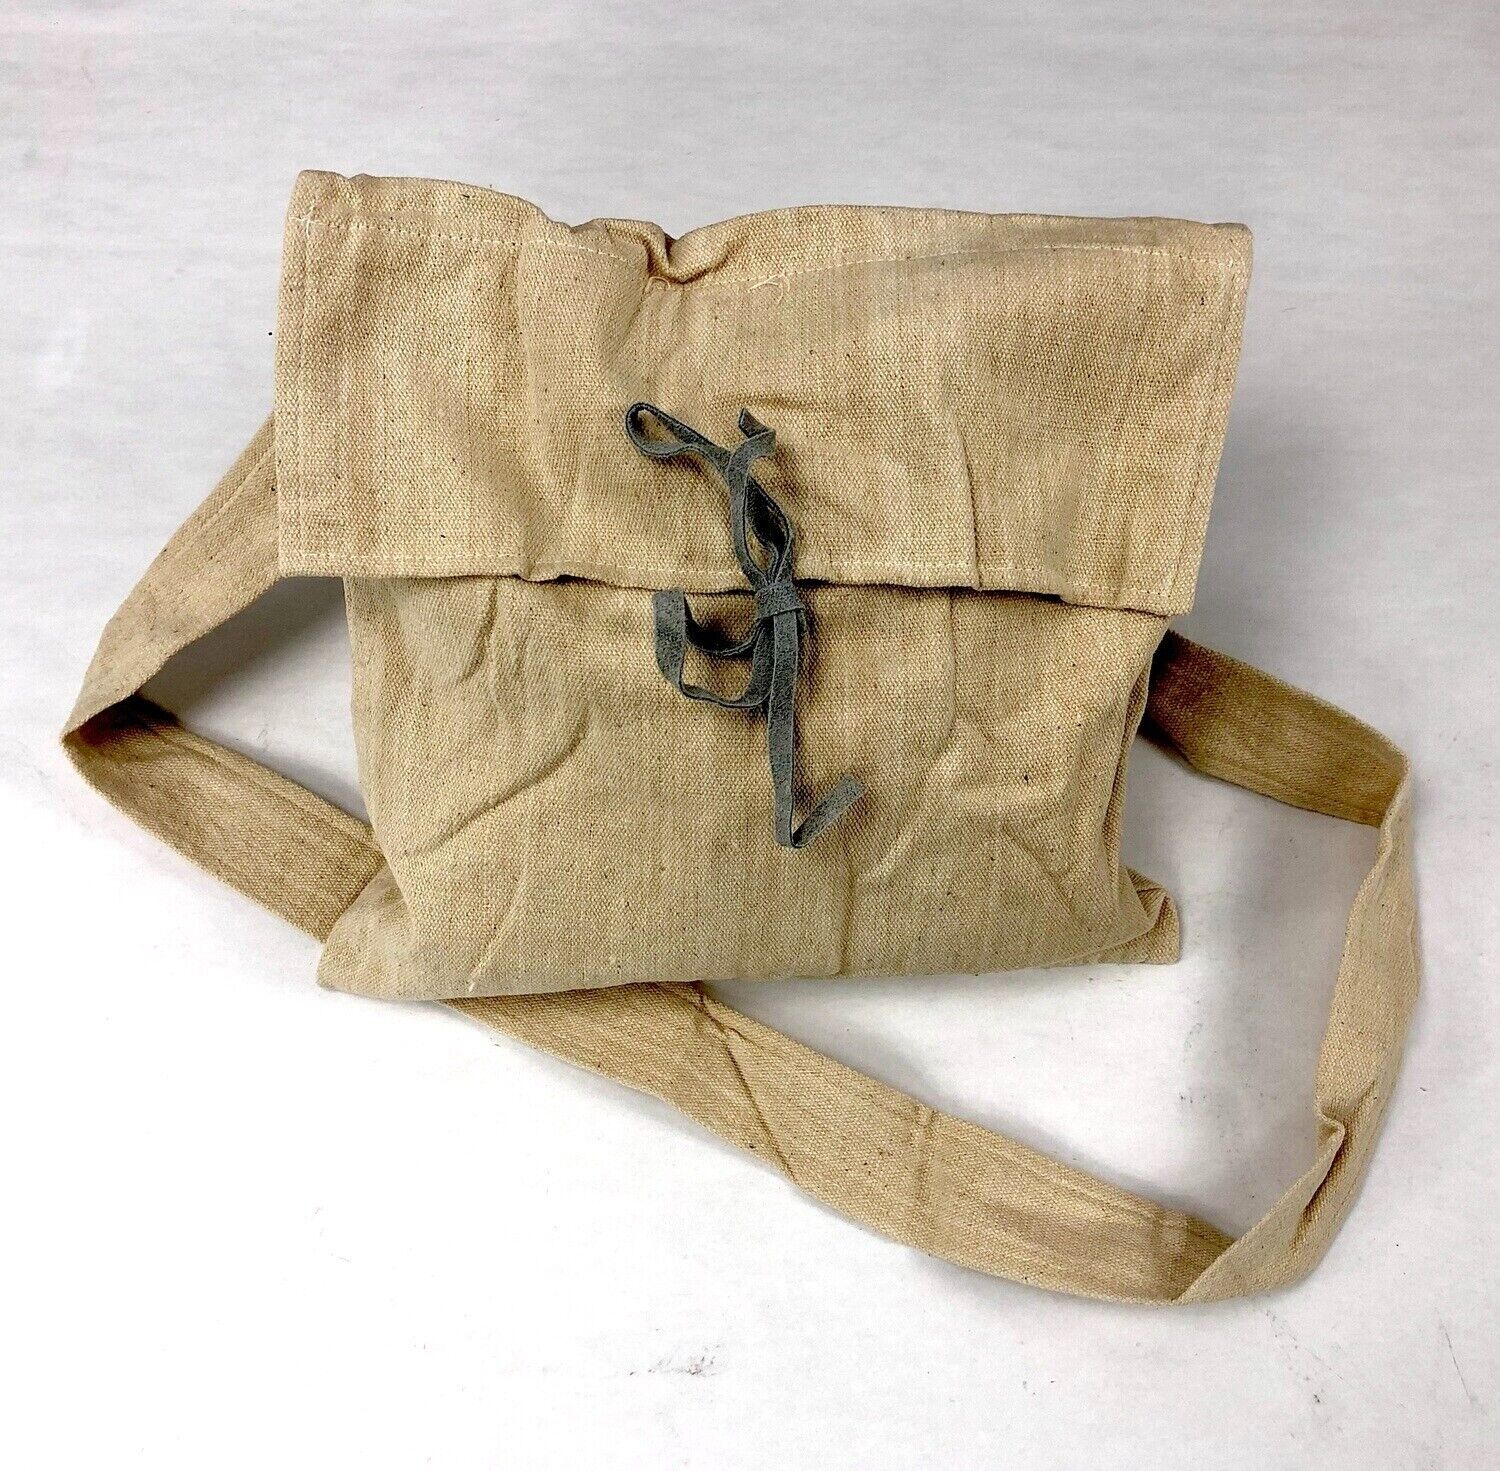 Rustic Haversack with Leather Tie Closure - Reenactment, Rendezvous, Hunting